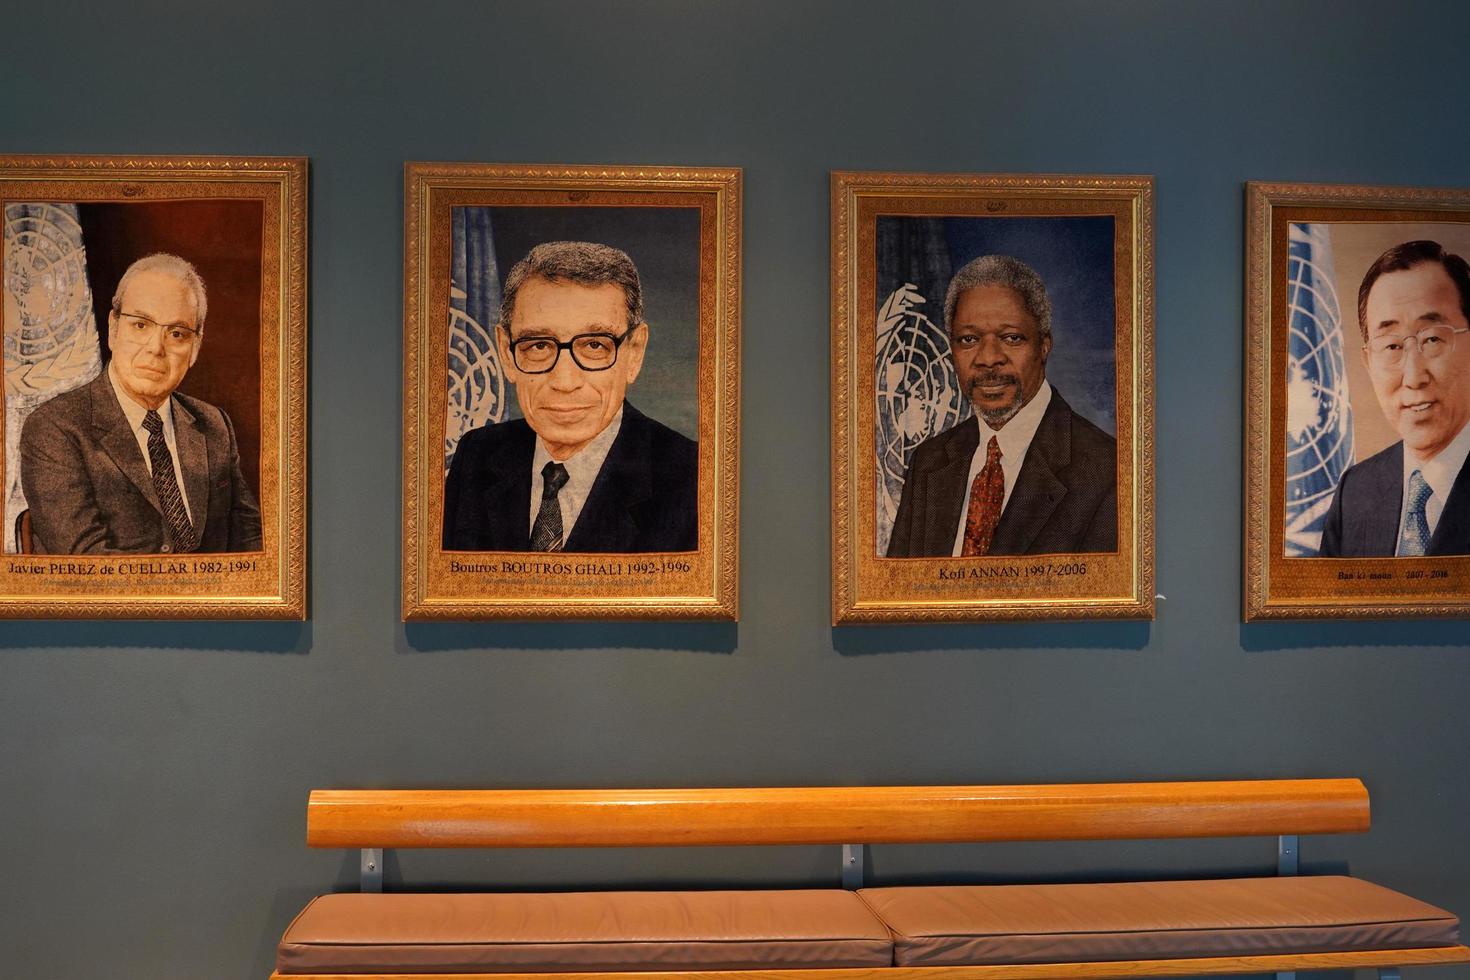 NEW YORK, USA - MAY 25 2018 United Nations past president hall with visitors photo